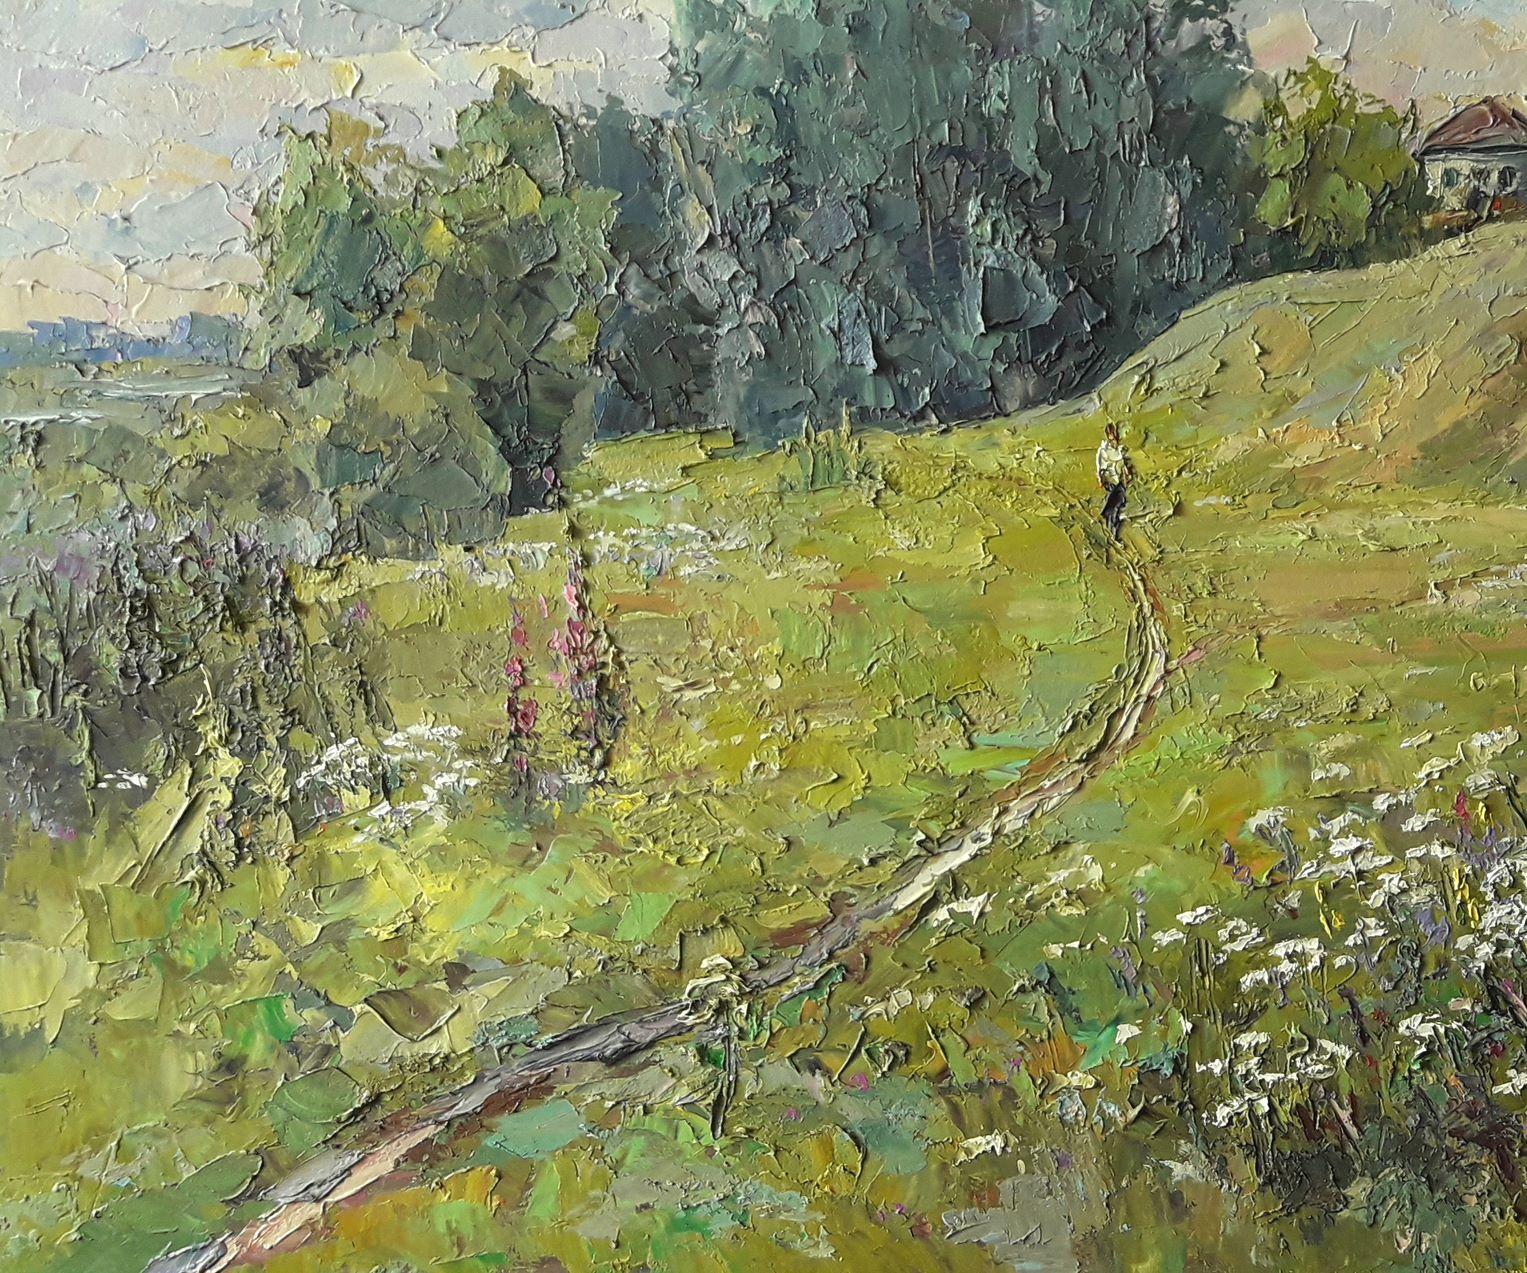 Flowers Scent, Landscape, Original oil Painting, Ready to Hang - Brown Landscape Painting by Boris Serdyuk 